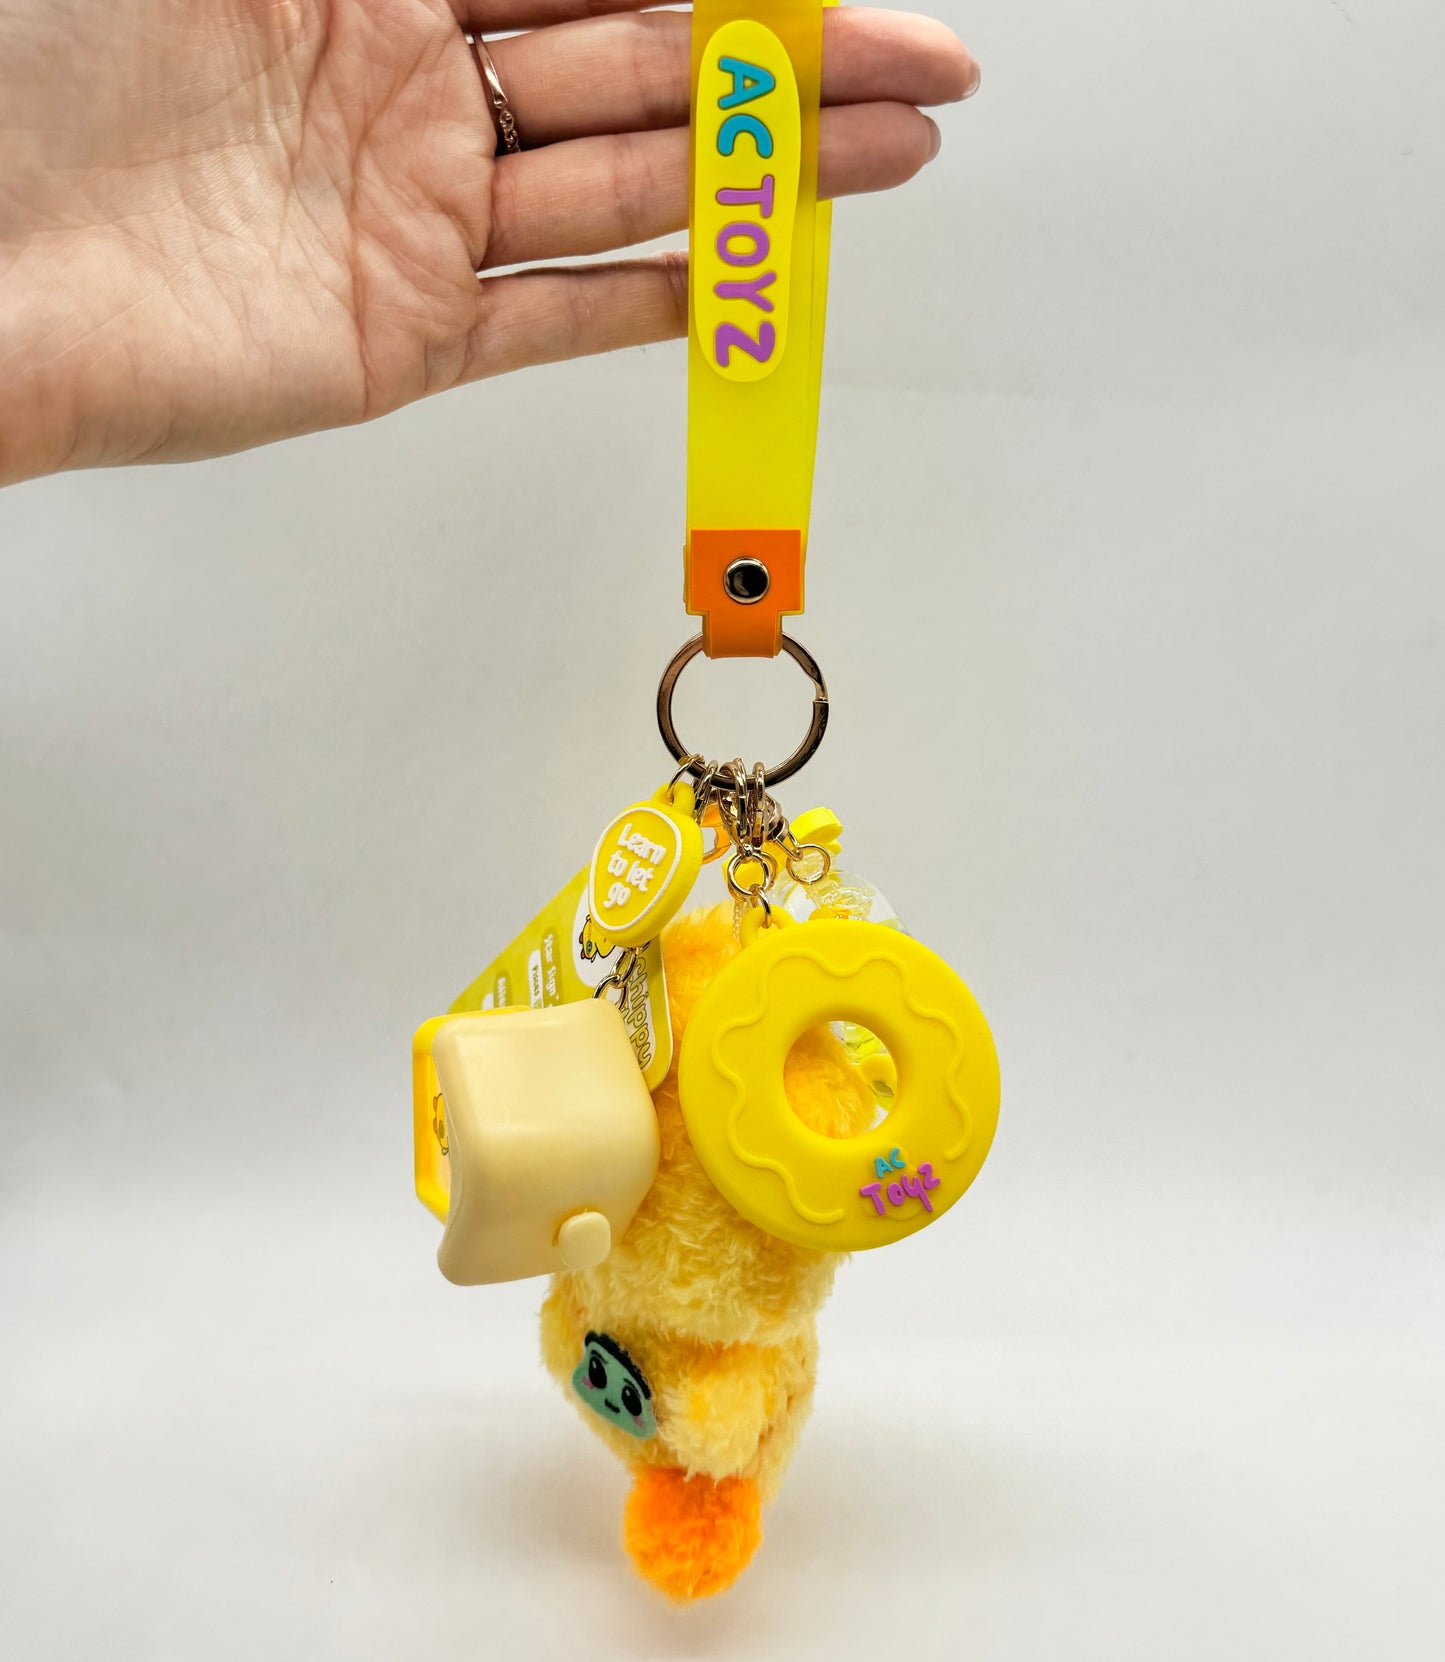 Chippy the Chick Comfort Keychain® 🐥